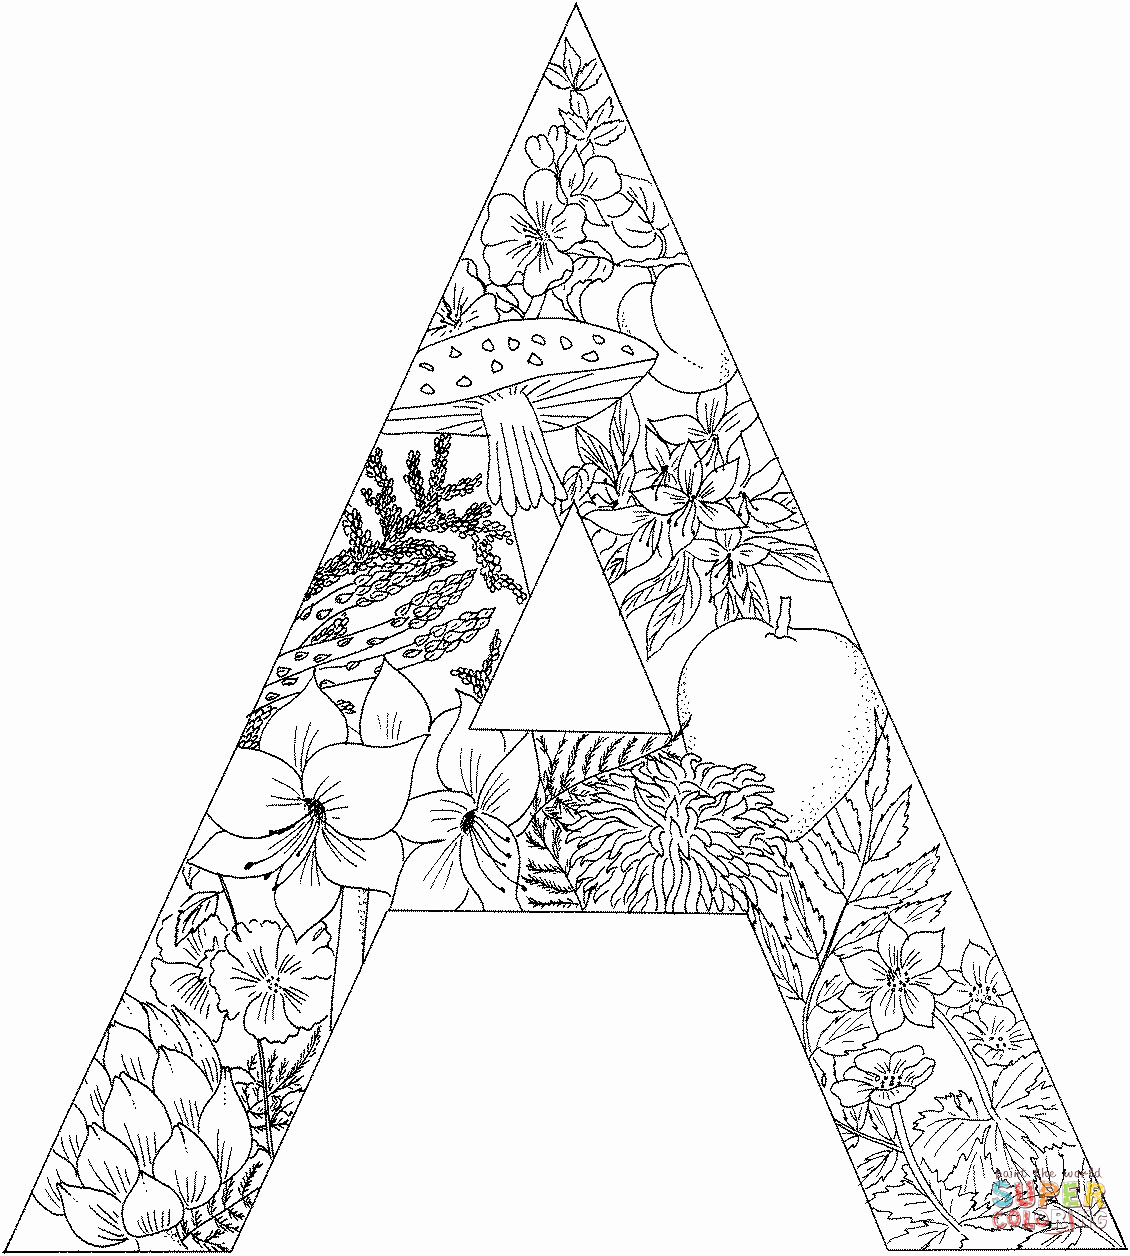 Letter A Printable Luxury Letter A with Plants Coloring Page